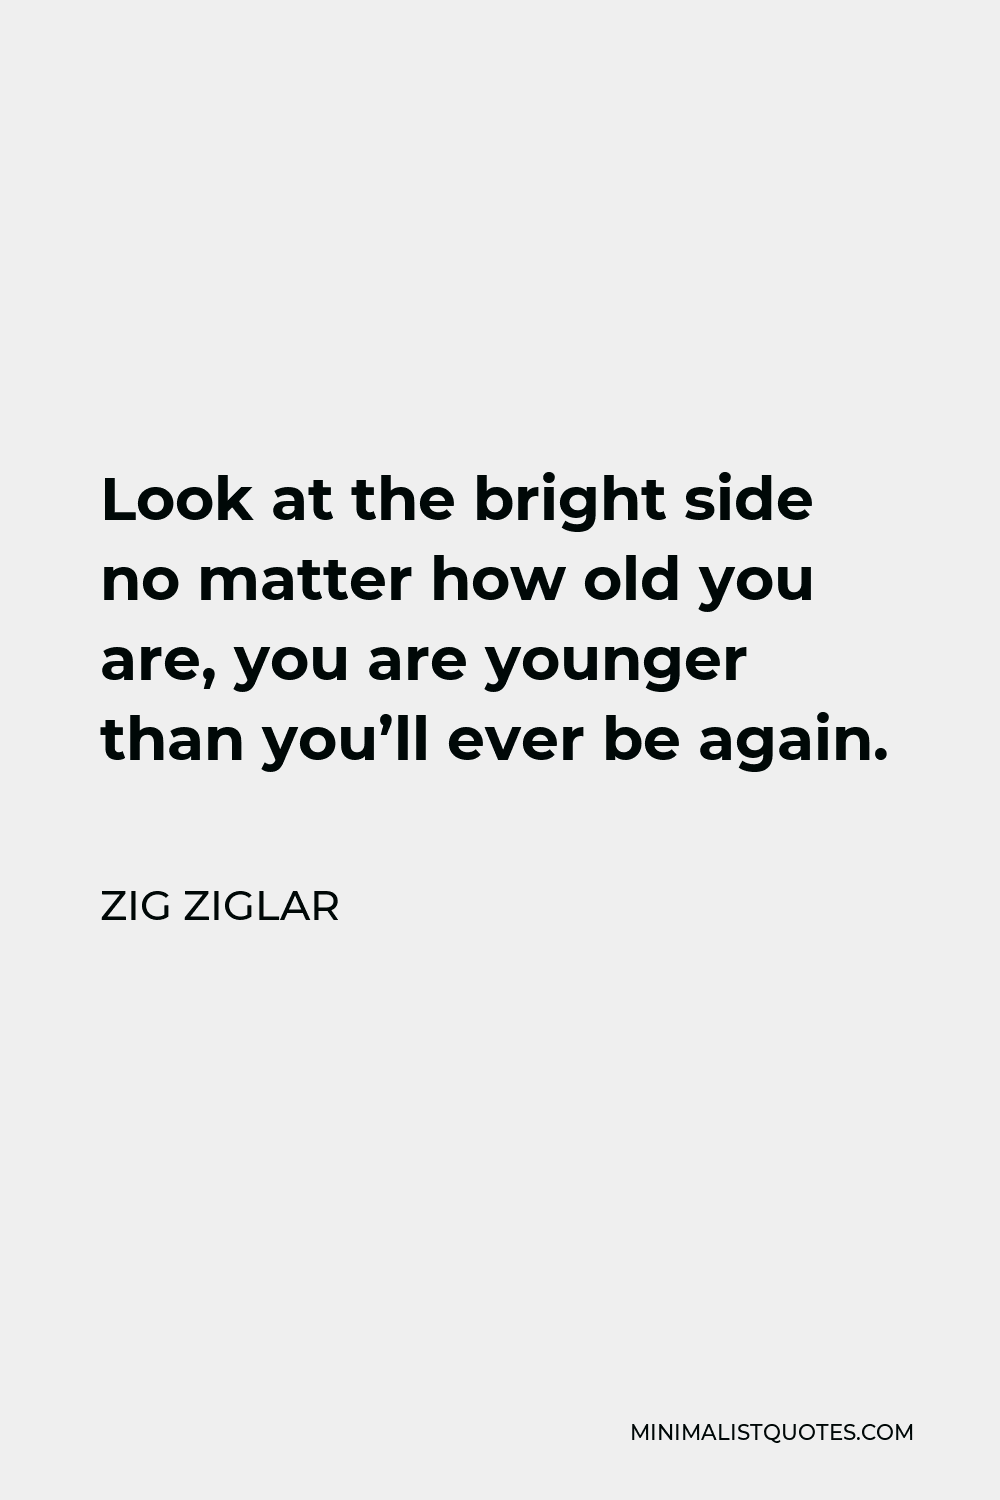 Zig Ziglar Quote - Look at the bright side no matter how old you are, you are younger than you’ll ever be again.